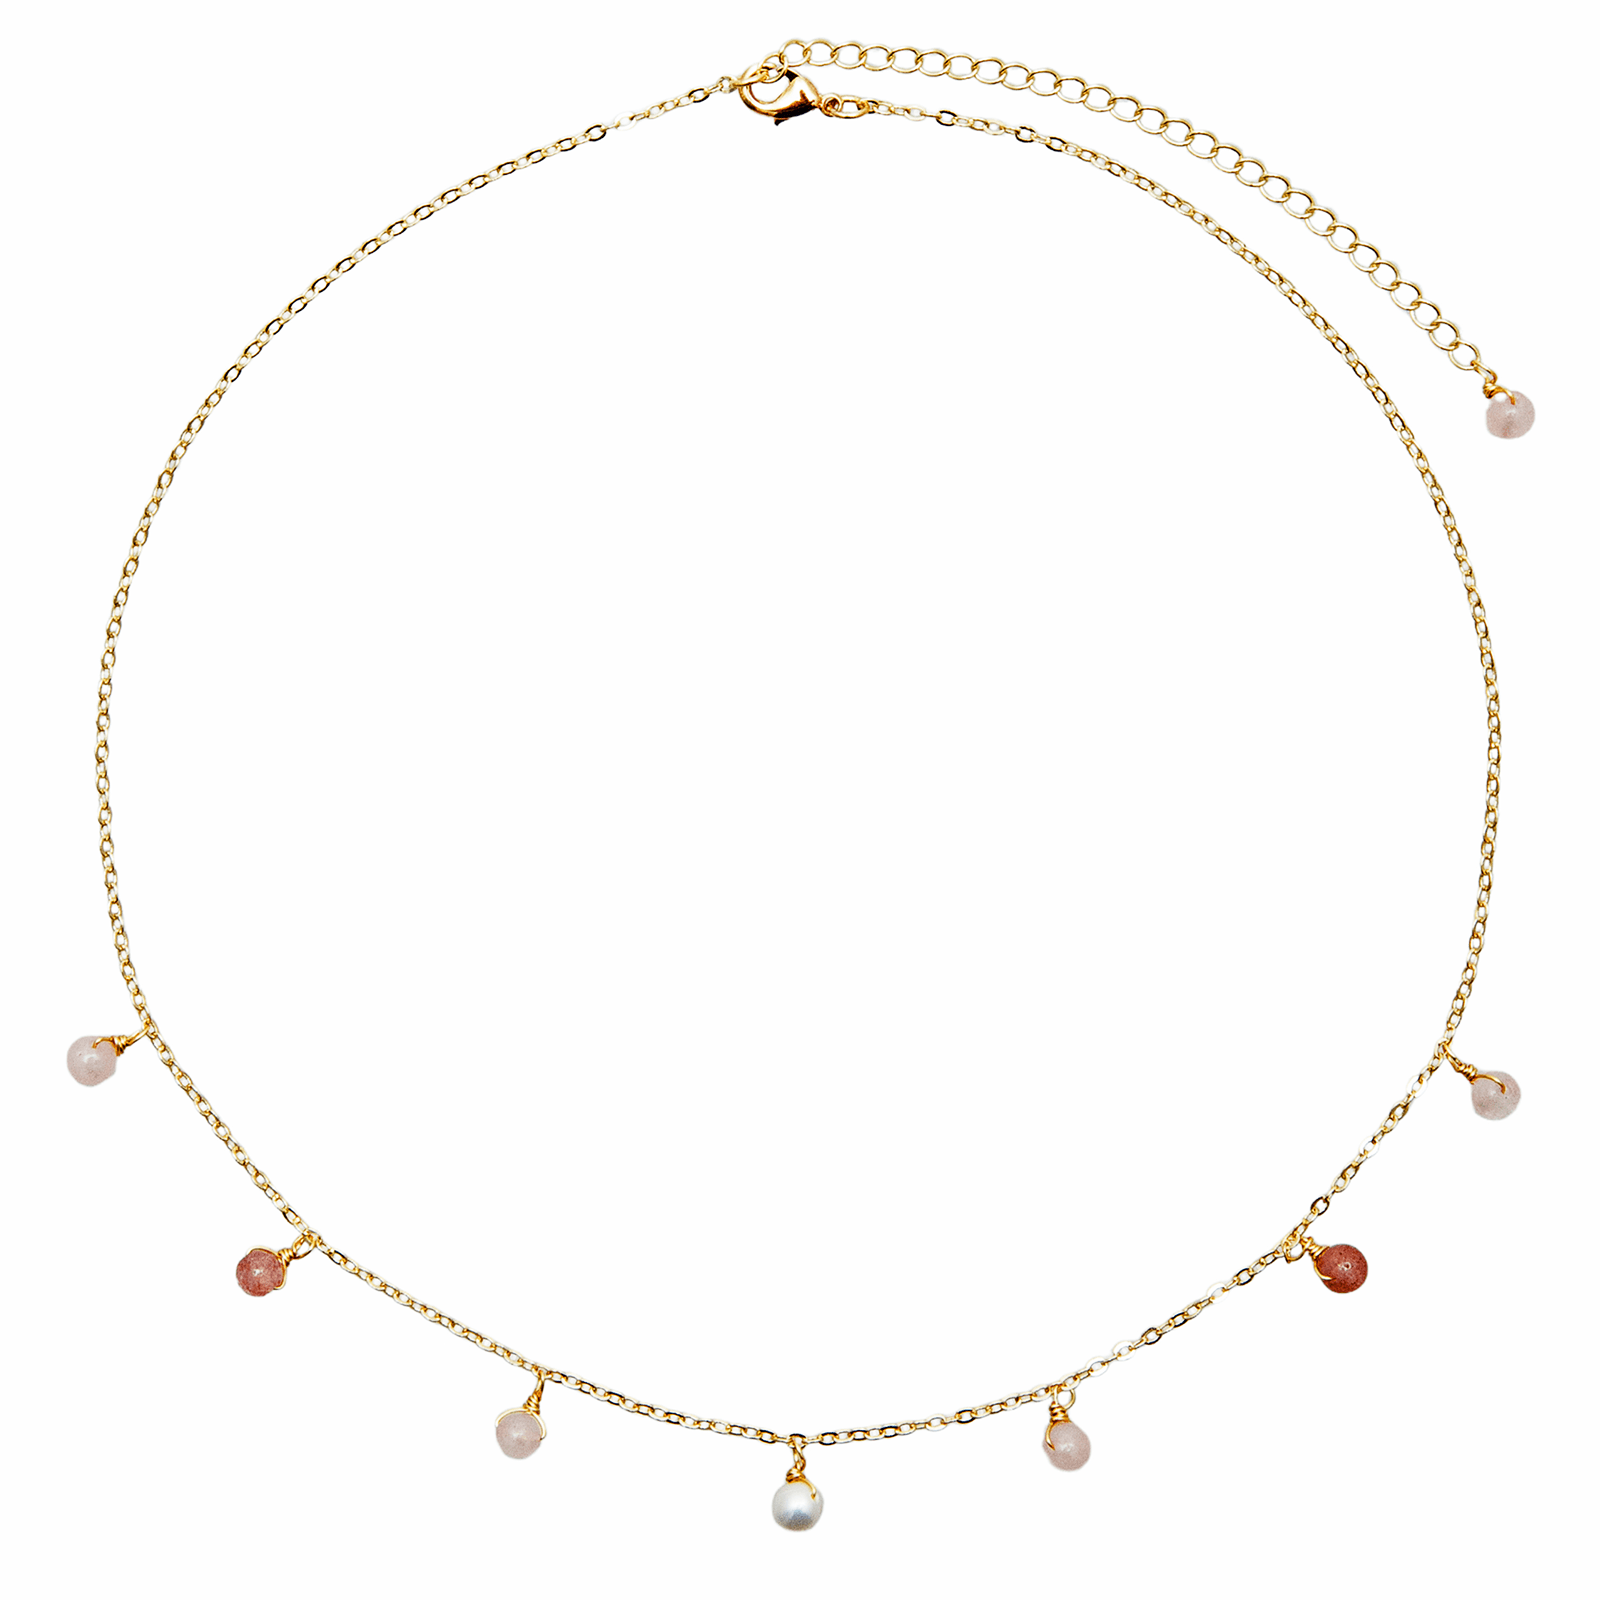 Gold chain necklace with pink, red and white dewdrop stone charms